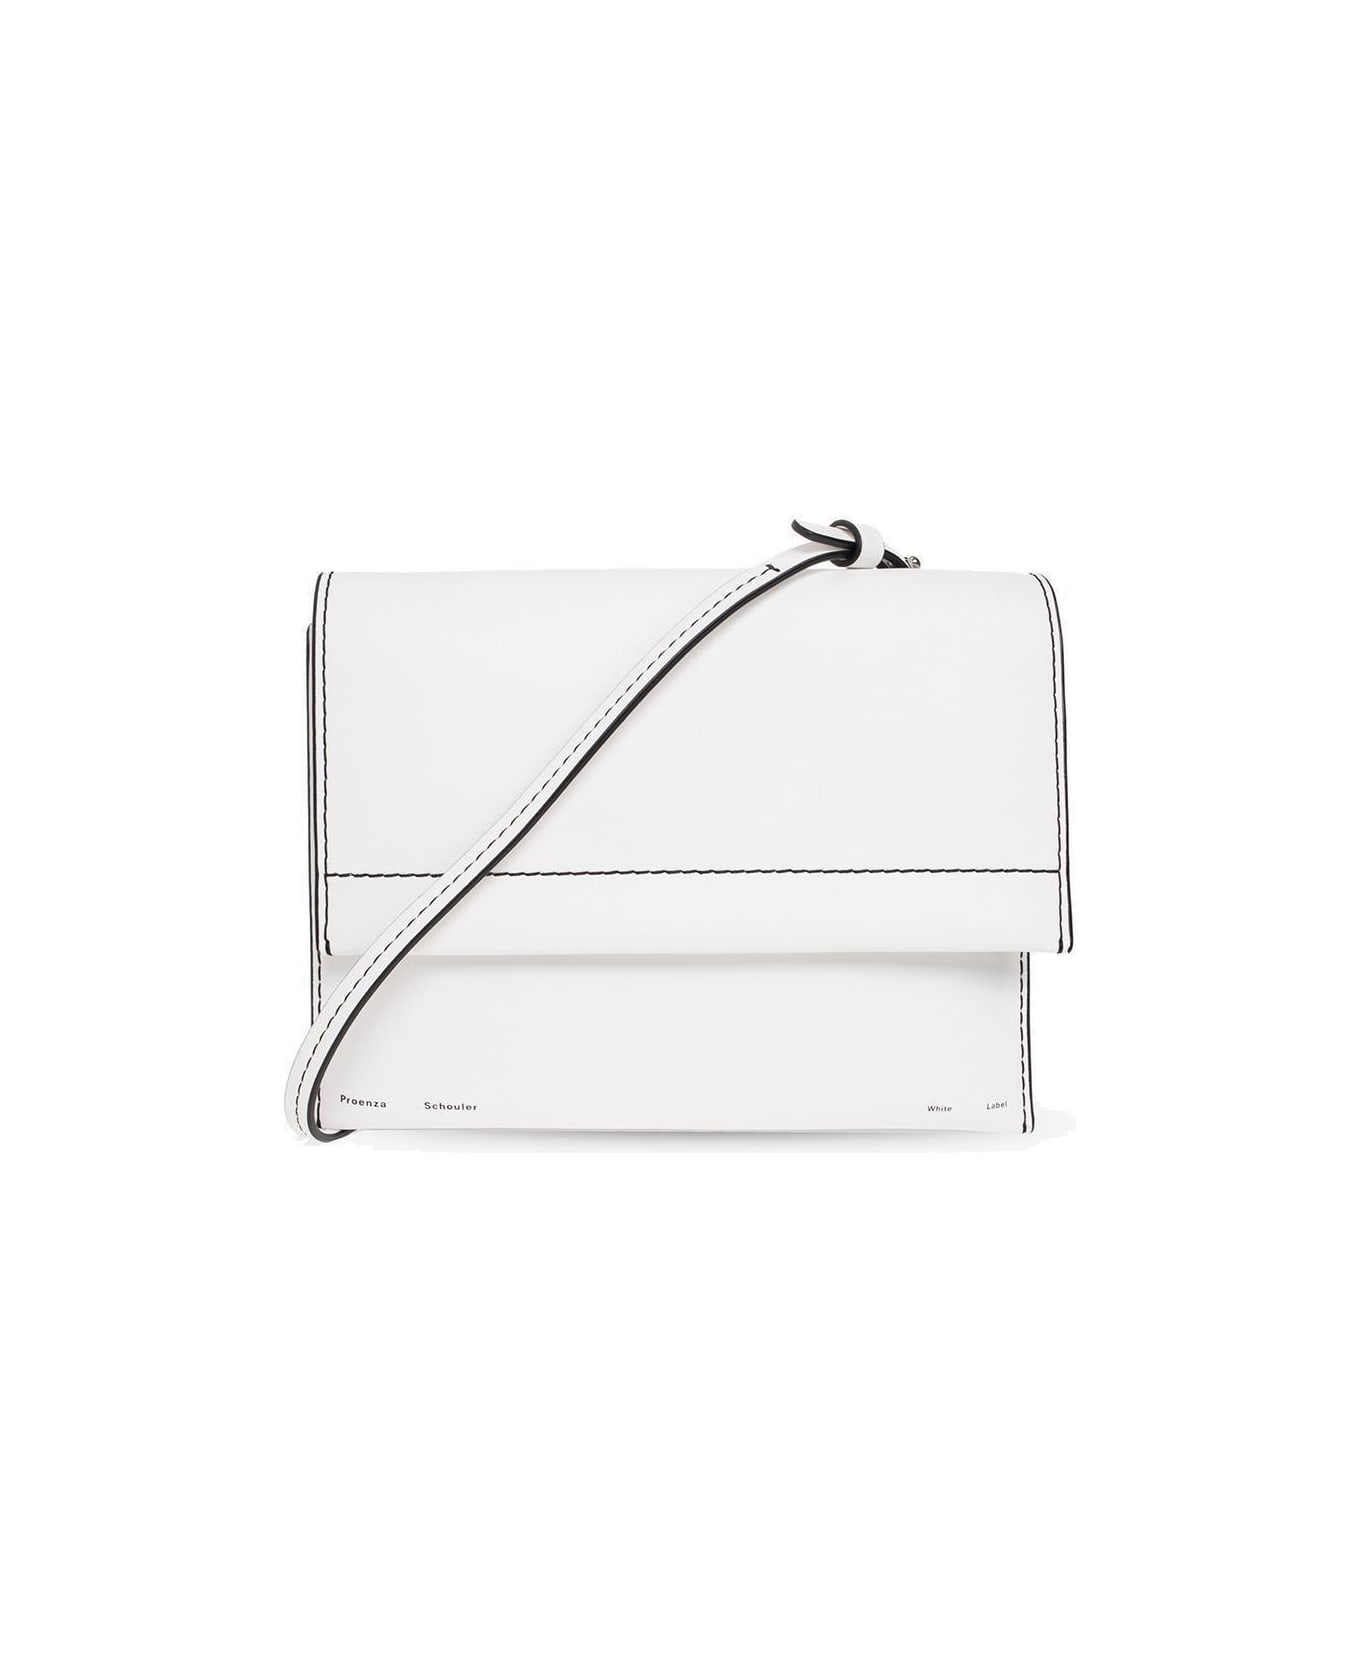 Proenza Schouler White Label Accordition Flap Shoulder Bag - White ショルダーバッグ